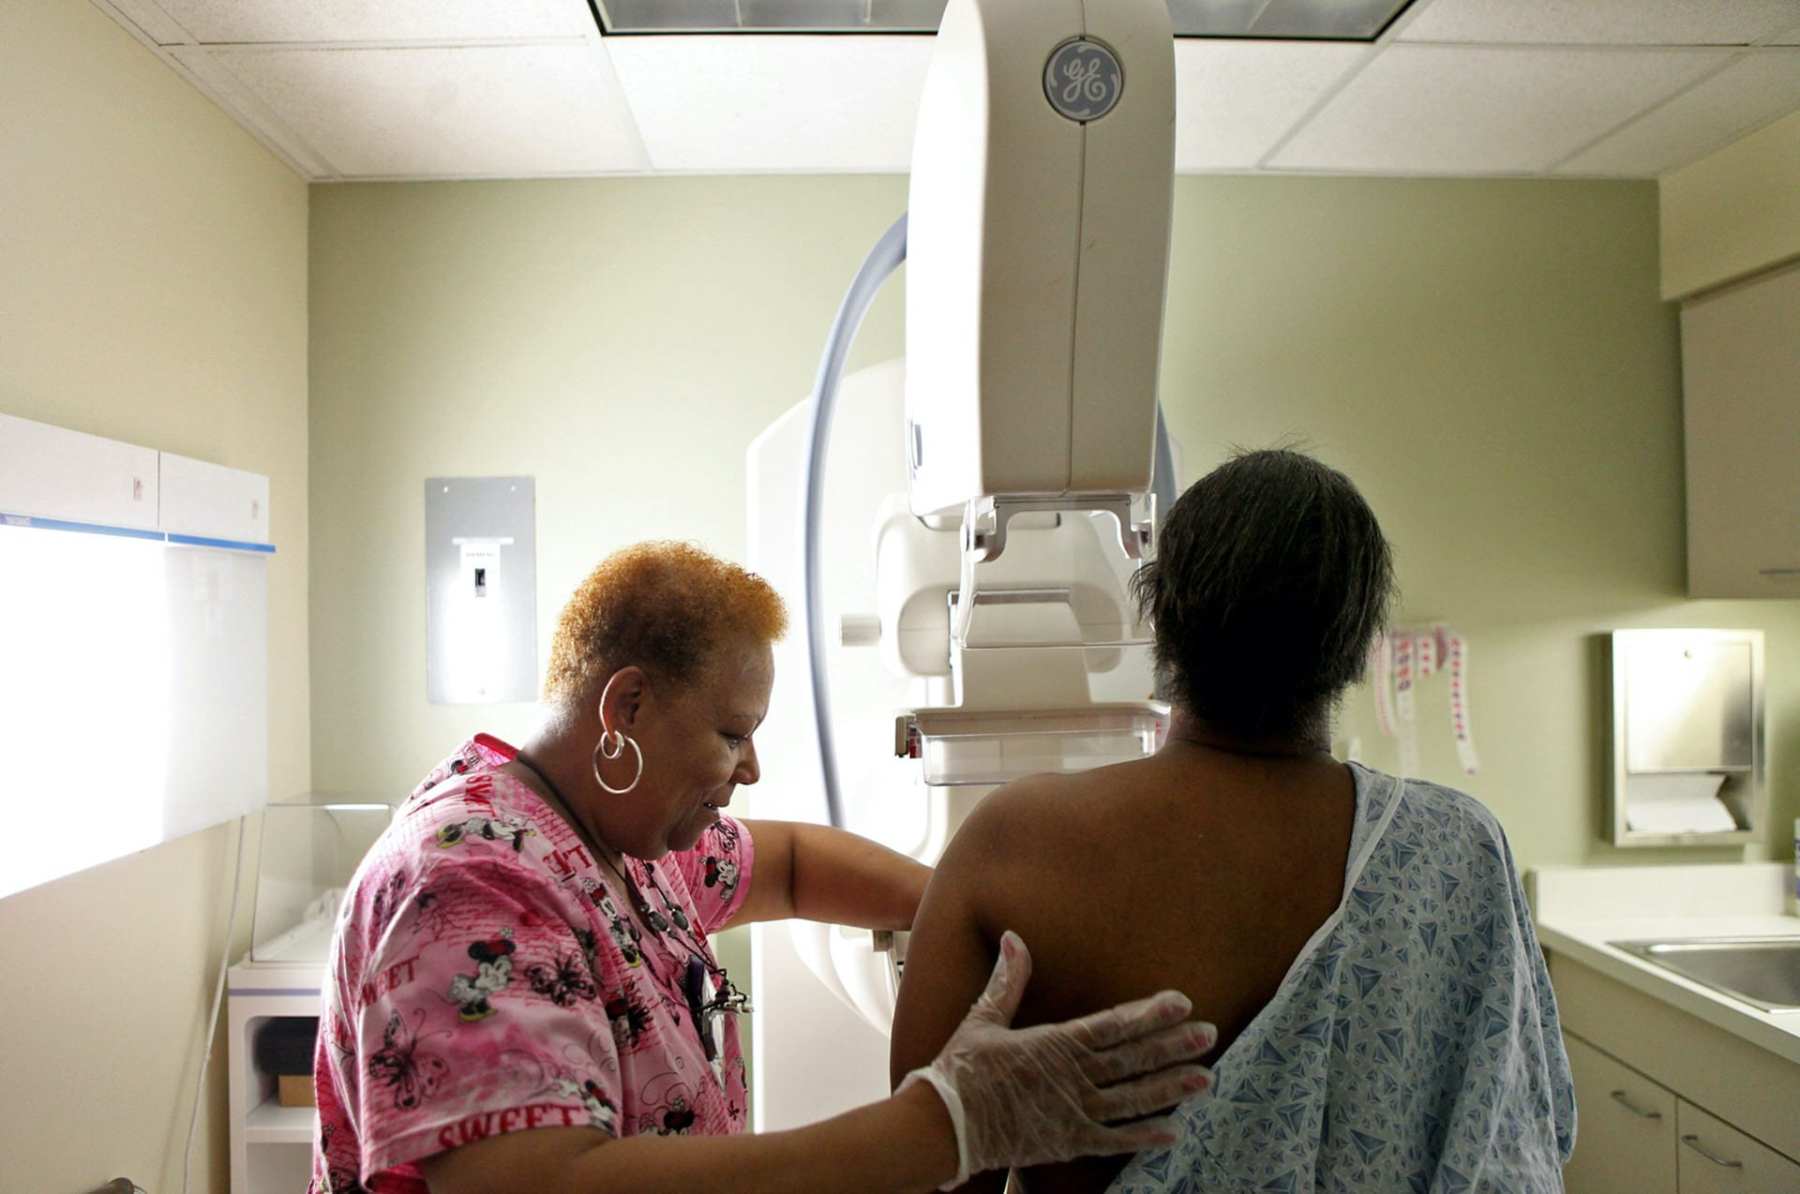 A woman administers a mammogram to another woman.